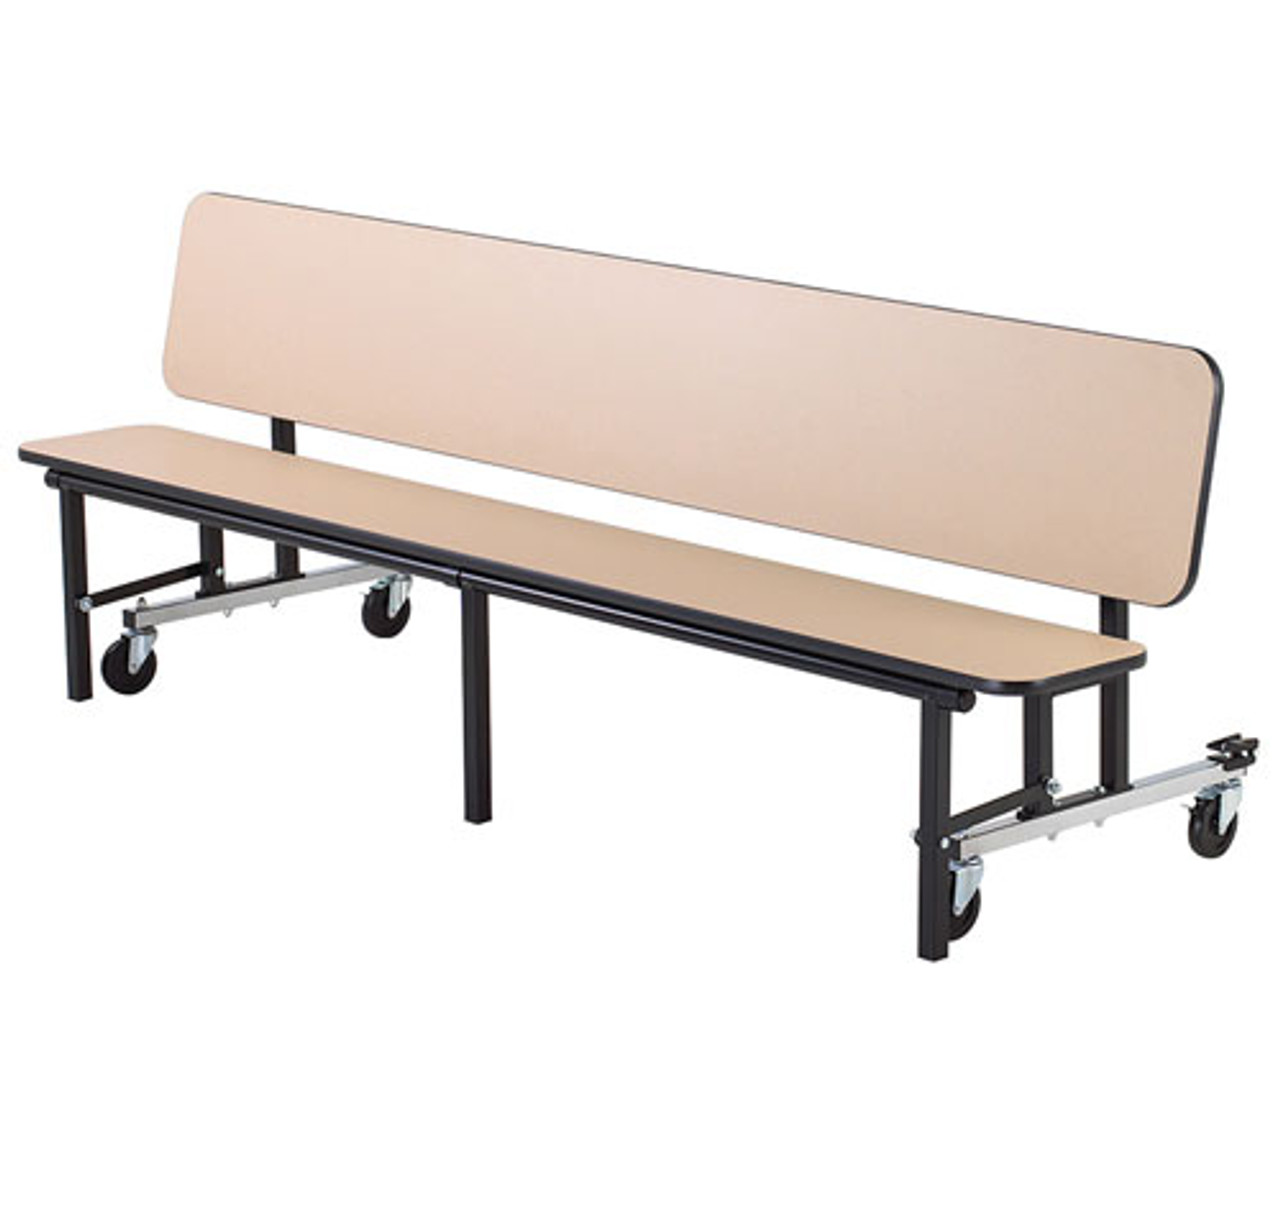 UCB8 29 X 96 Convertible Bench Cafeteria Table L